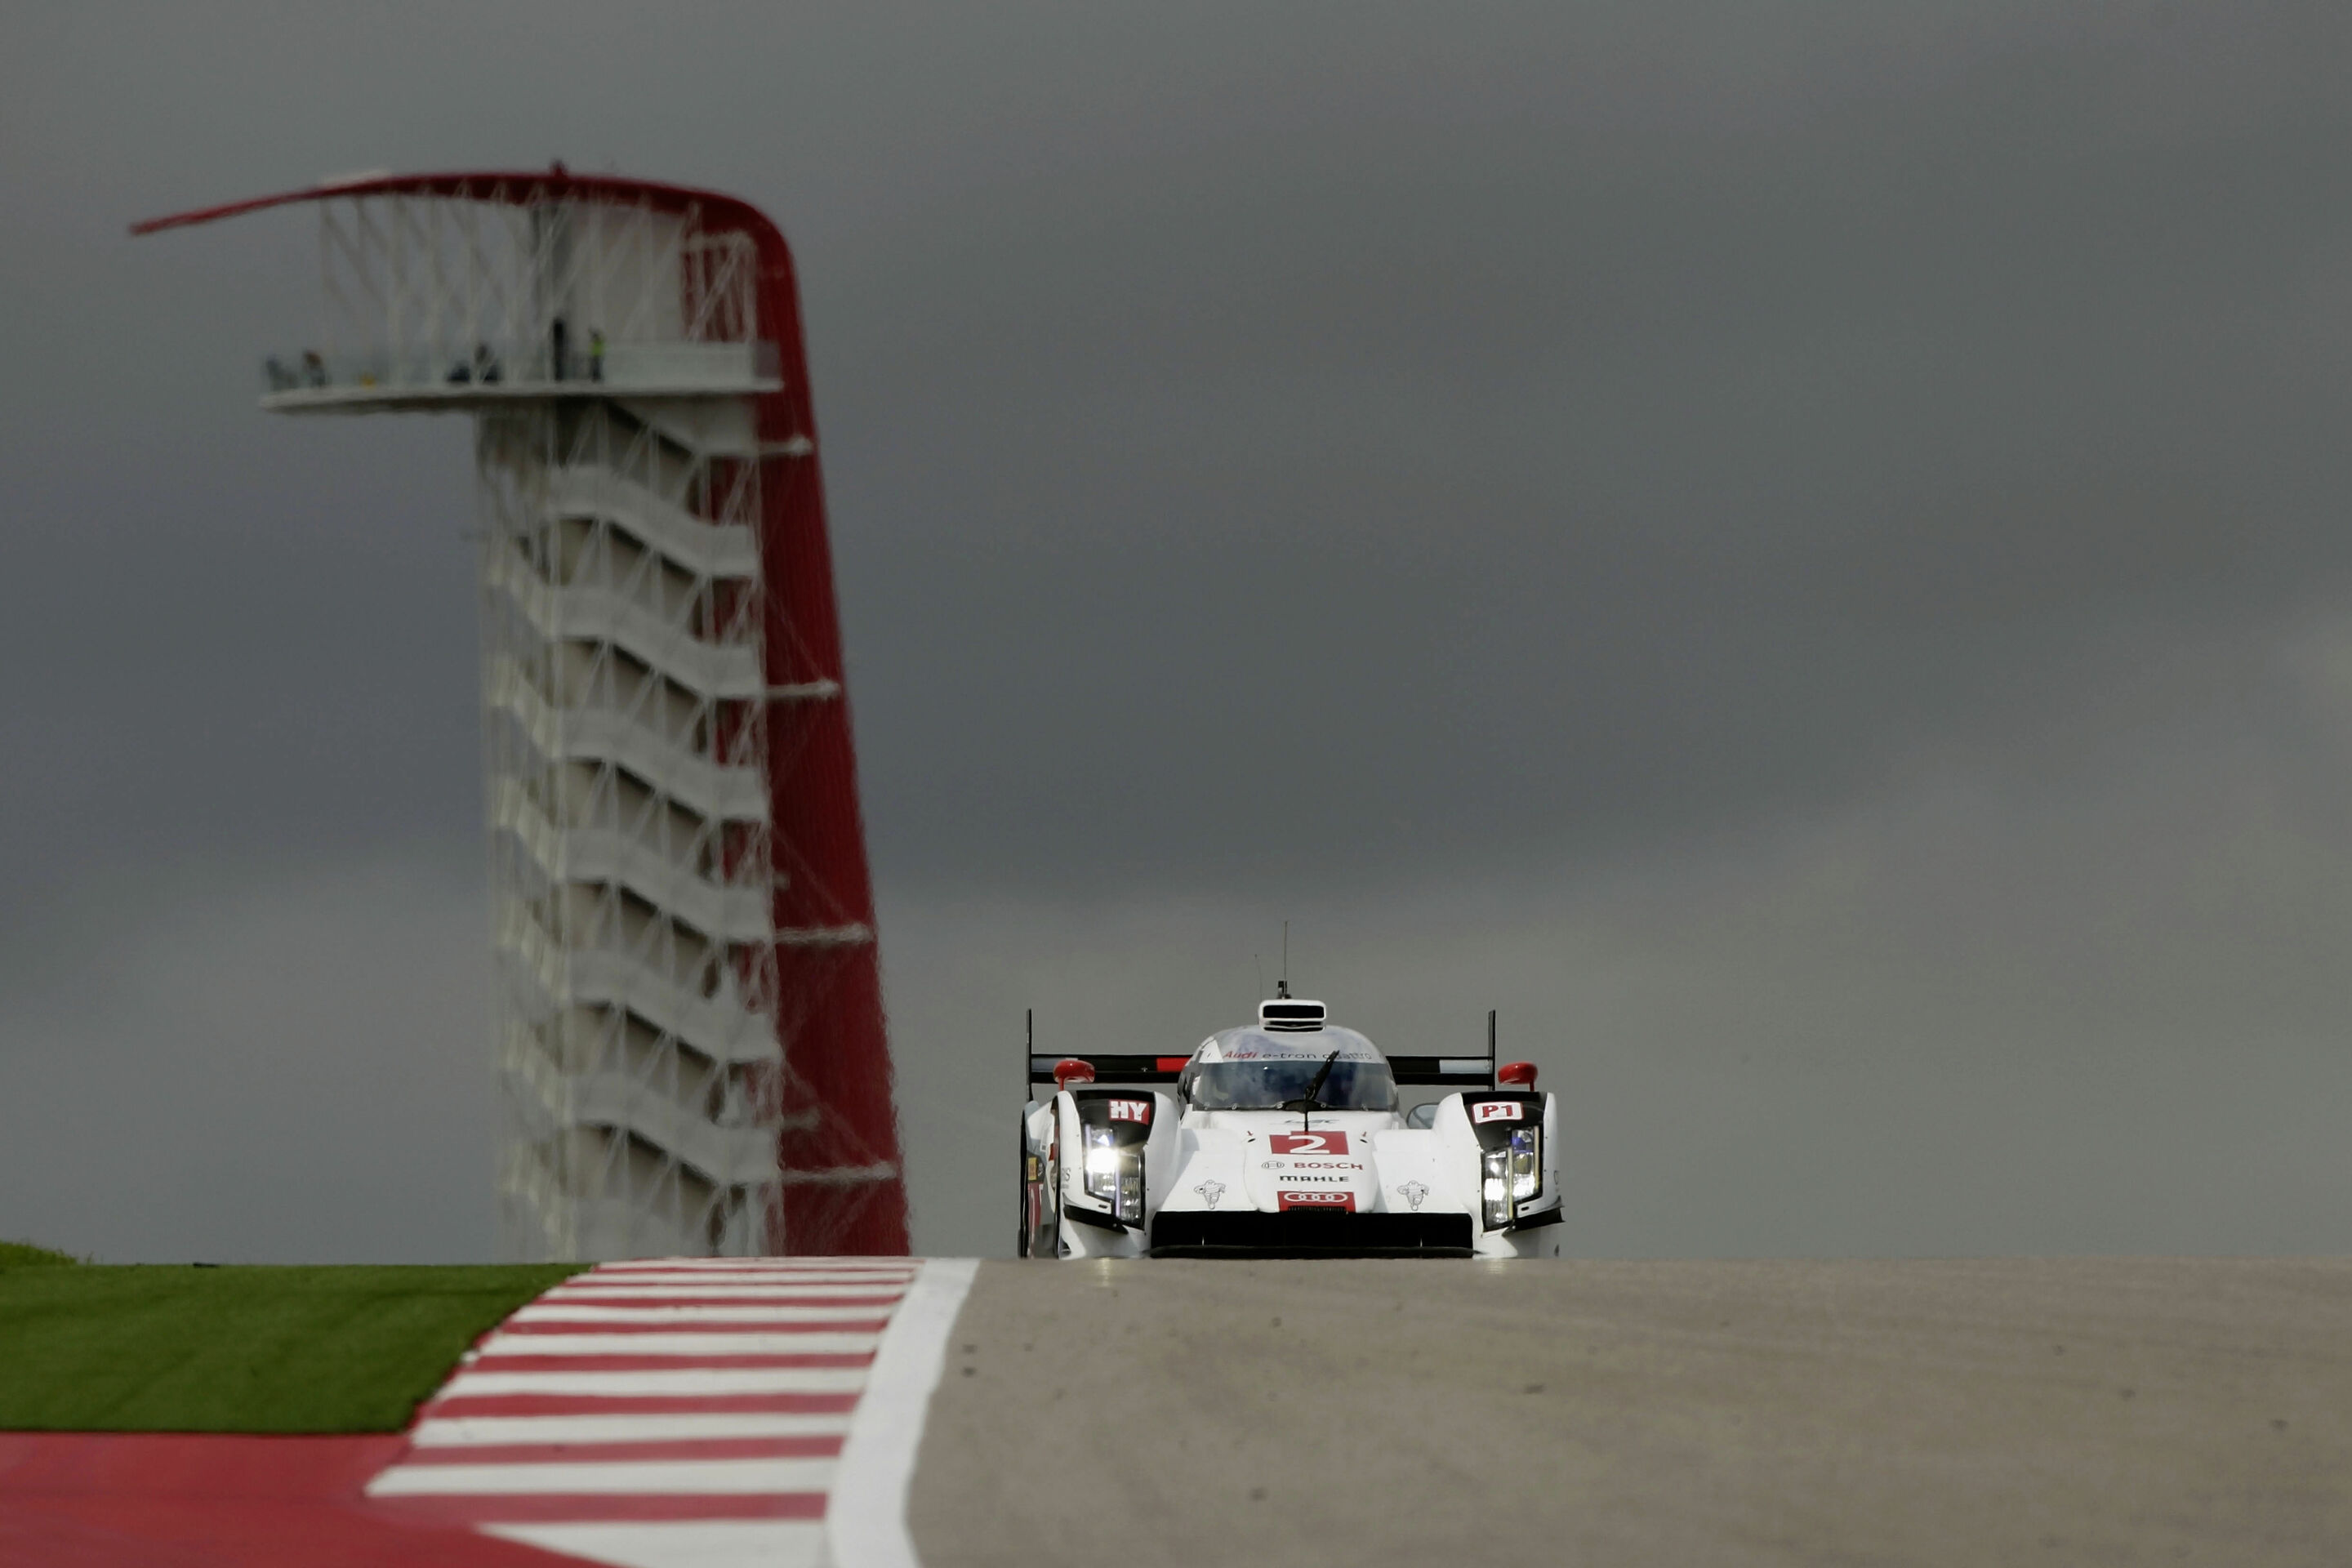 Disappointment for Audi in qualifying at Austin